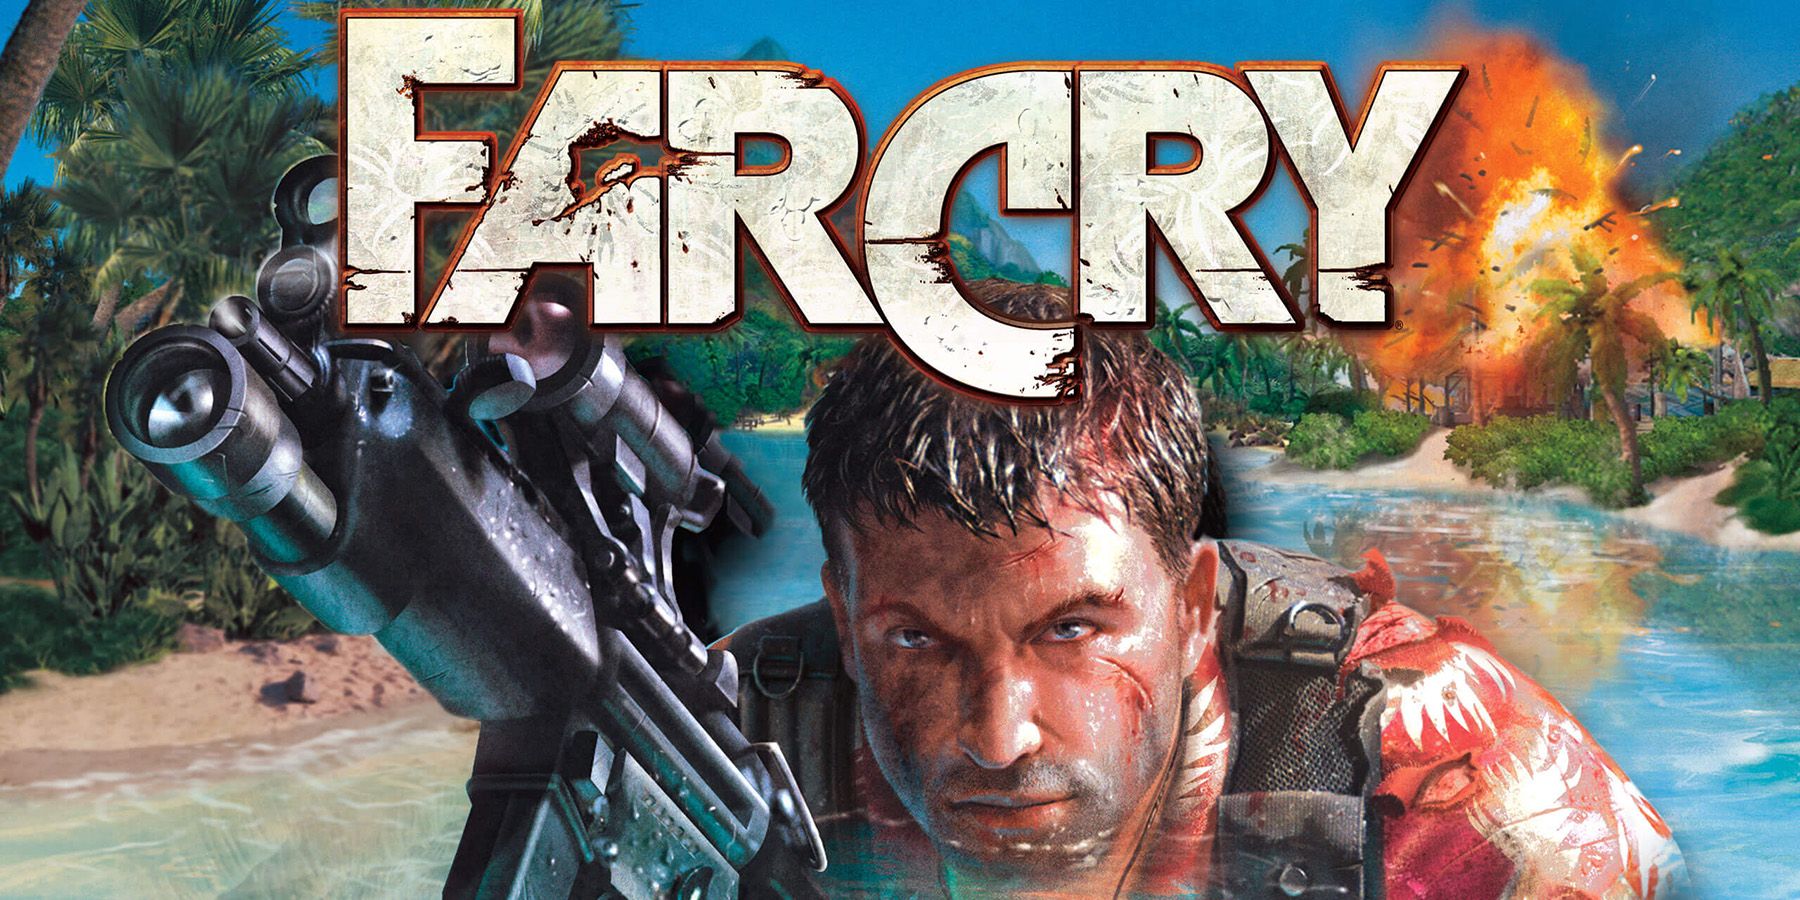 Separate single and multiplayer Far Cry games reportedly in development